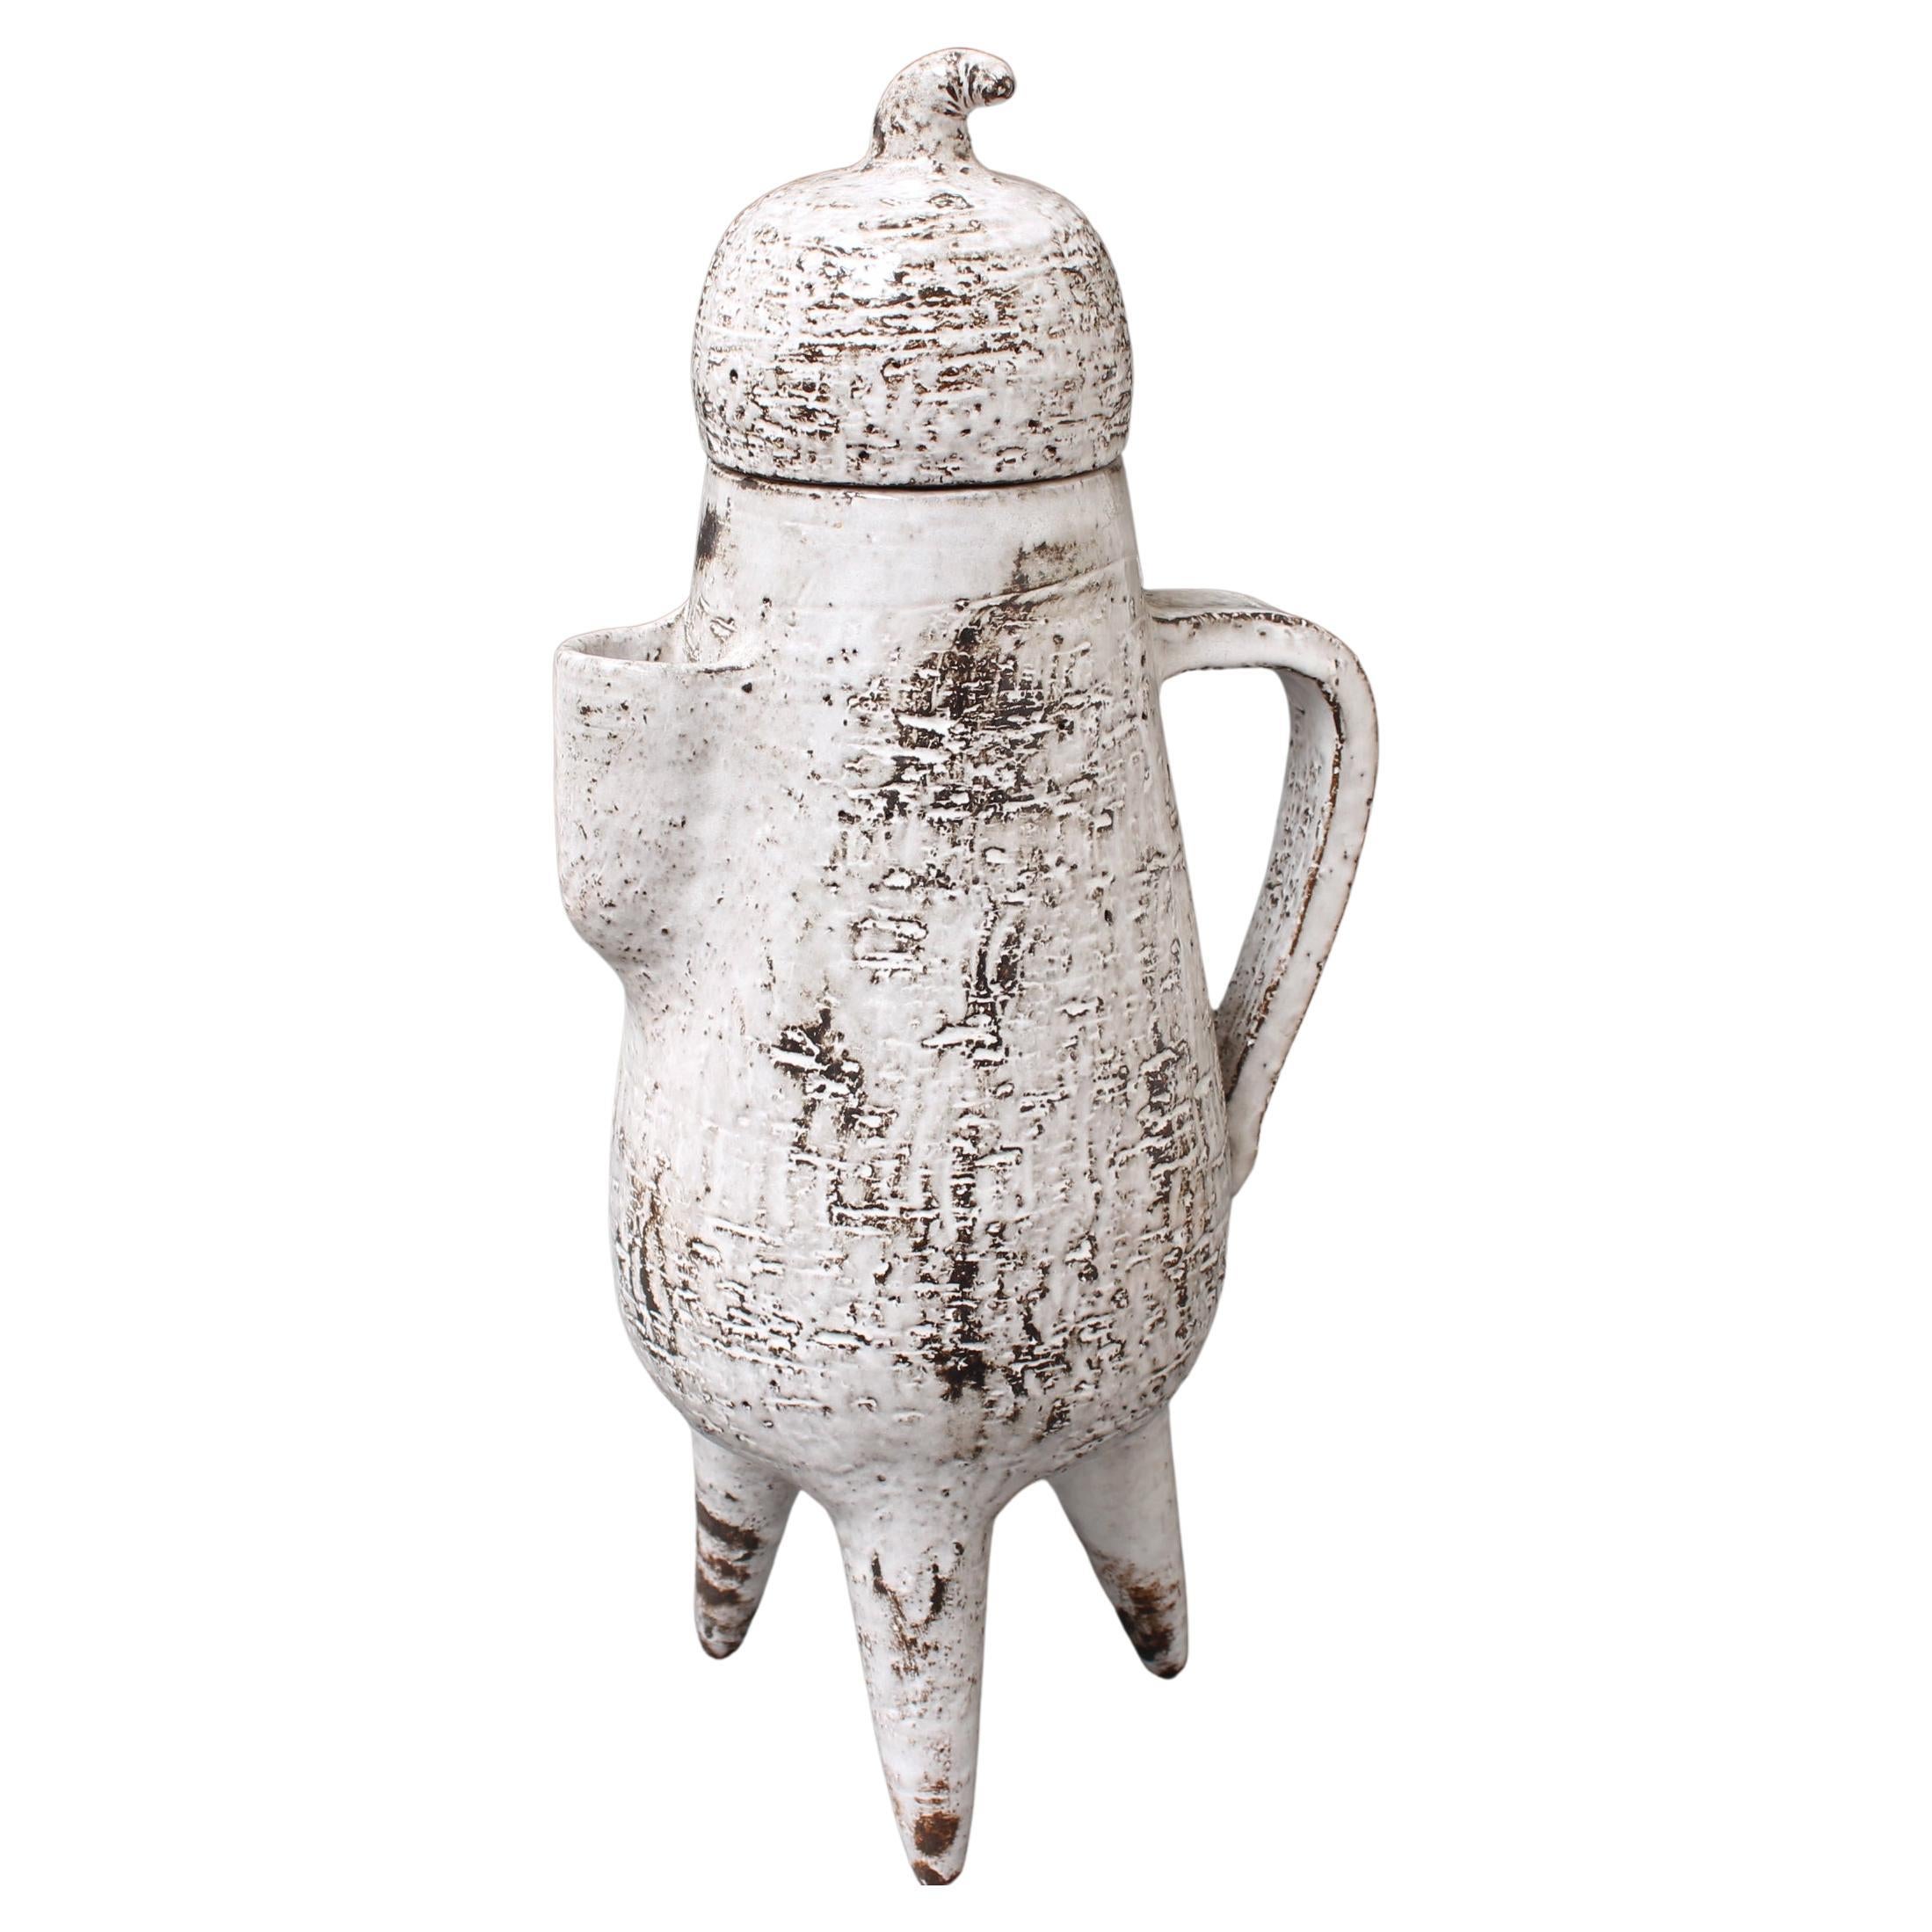 Vintage French Ceramic Jug with Lid by Gérard Hofmann (circa 1960s) For Sale